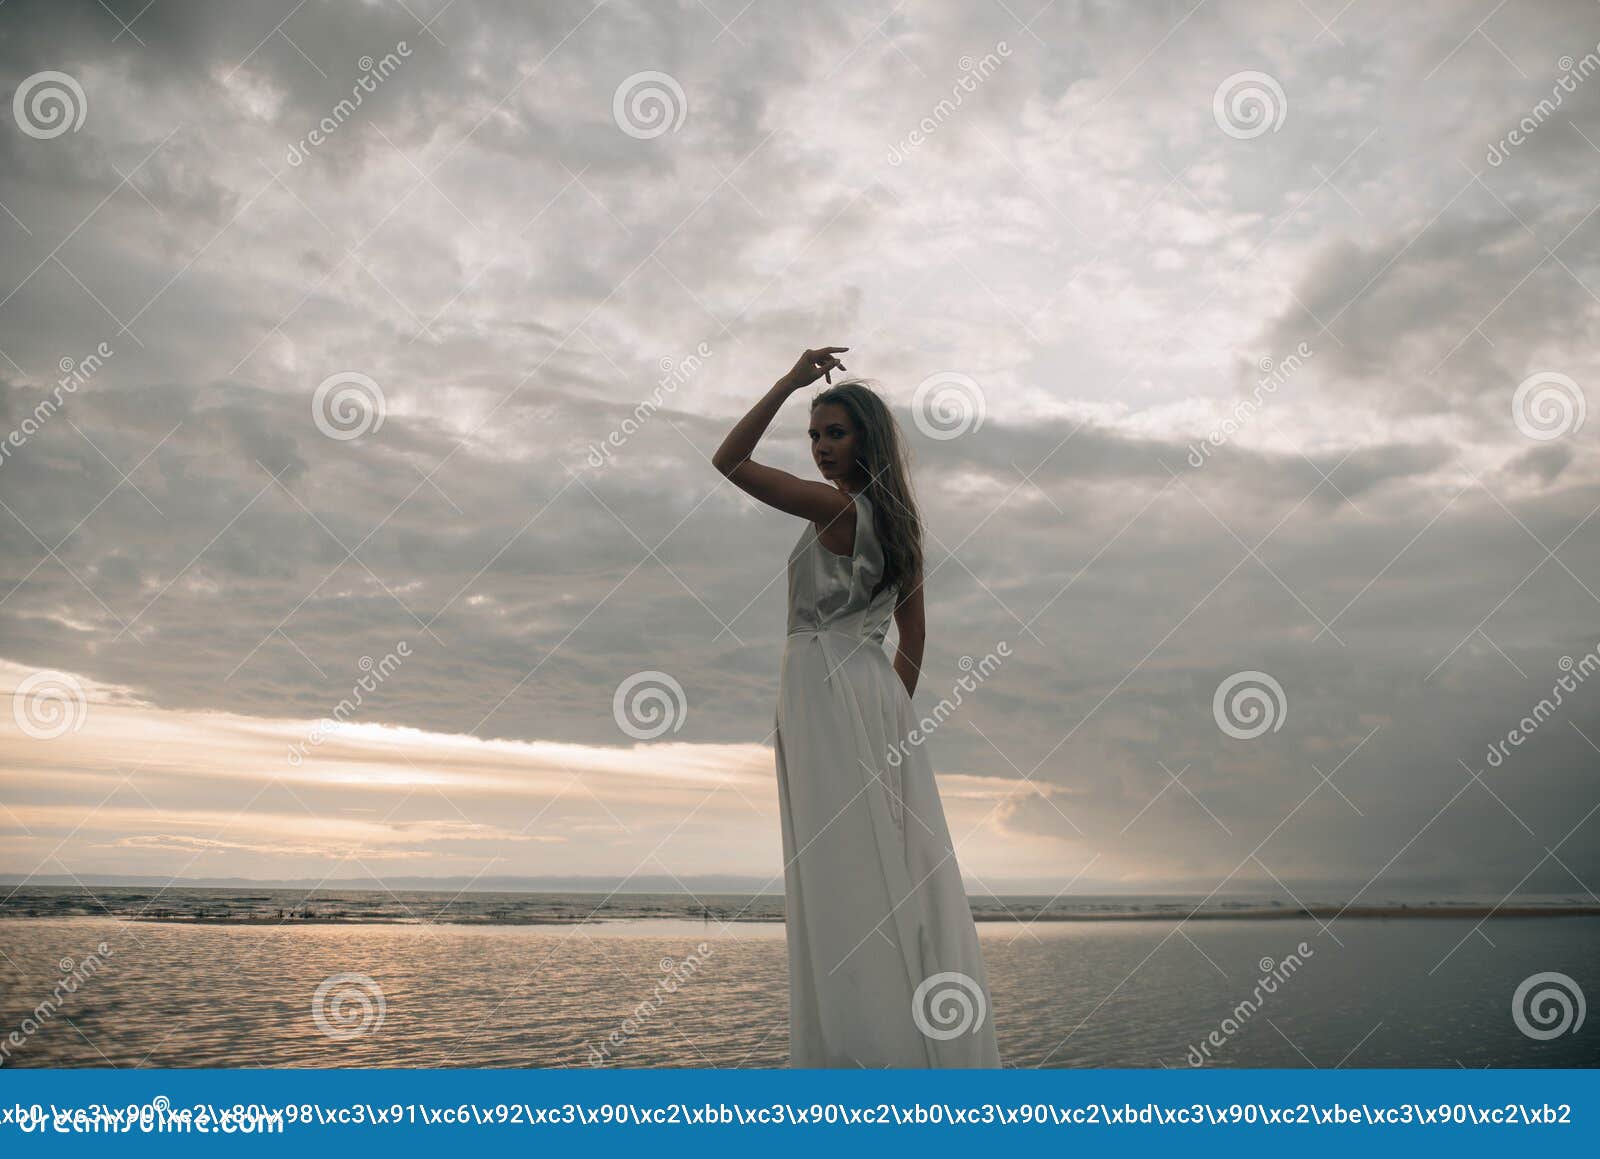 Woman On Sea At Sunset In White Dress Stock Photo Image Of Lifestyle